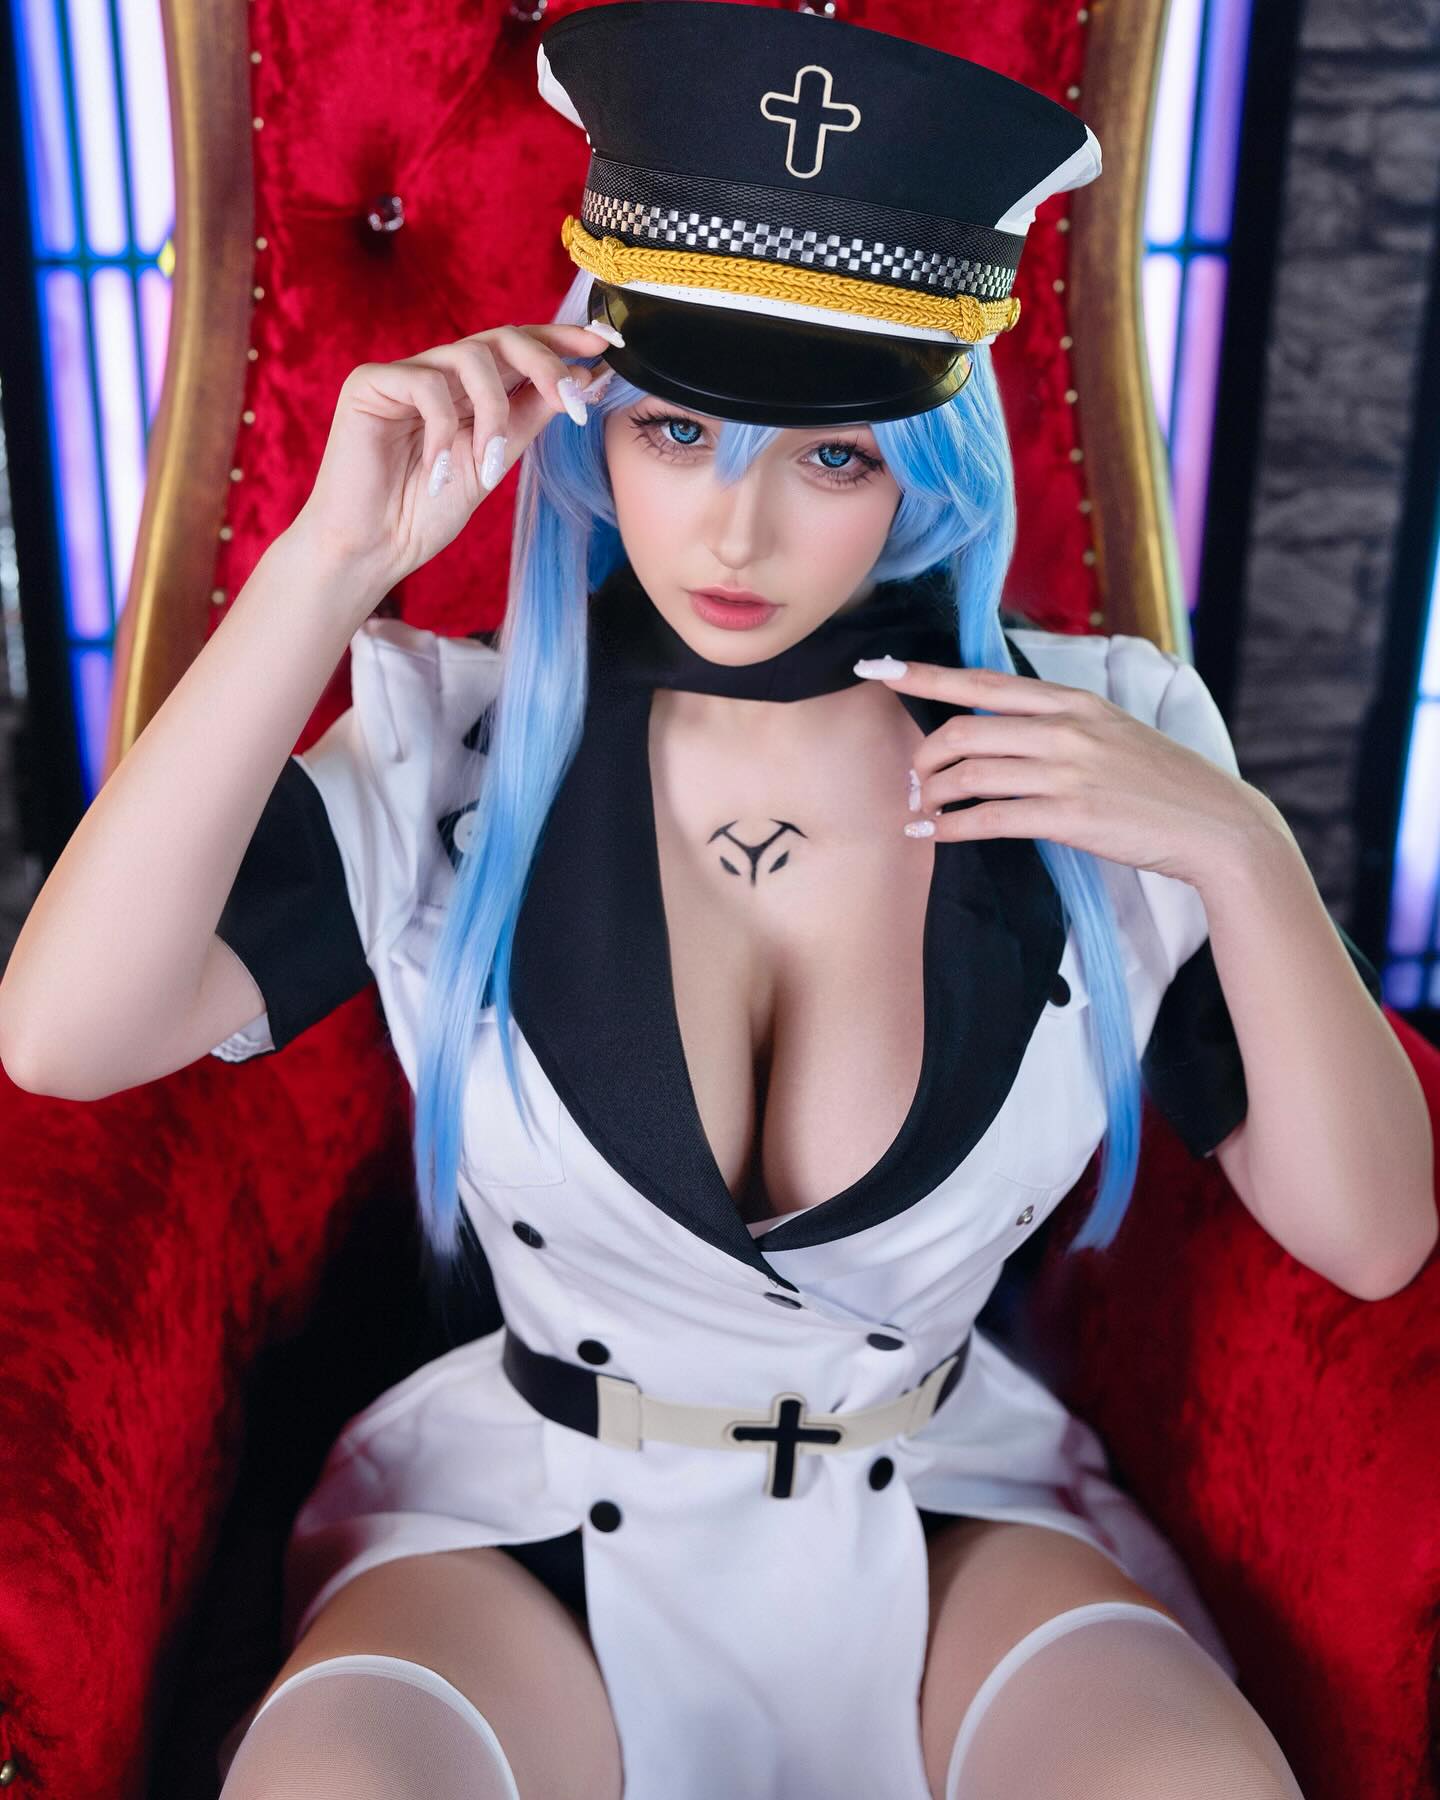 General Esdeath🫡💦💘
_
The last pic is giving “mommy vibes”🫢🔥
Do you want to be my slave?😂⛓️
.
.
.
#esdeath #akamegakill #esdeathcosplay #cosplay #cosplayer #anime #animecosplay #waifuanime #waifumaterial #animewaifu #cosplayersofinstagram #fyp #animefyp #animecosplayer #akamegakillcosplay #animeinstagram